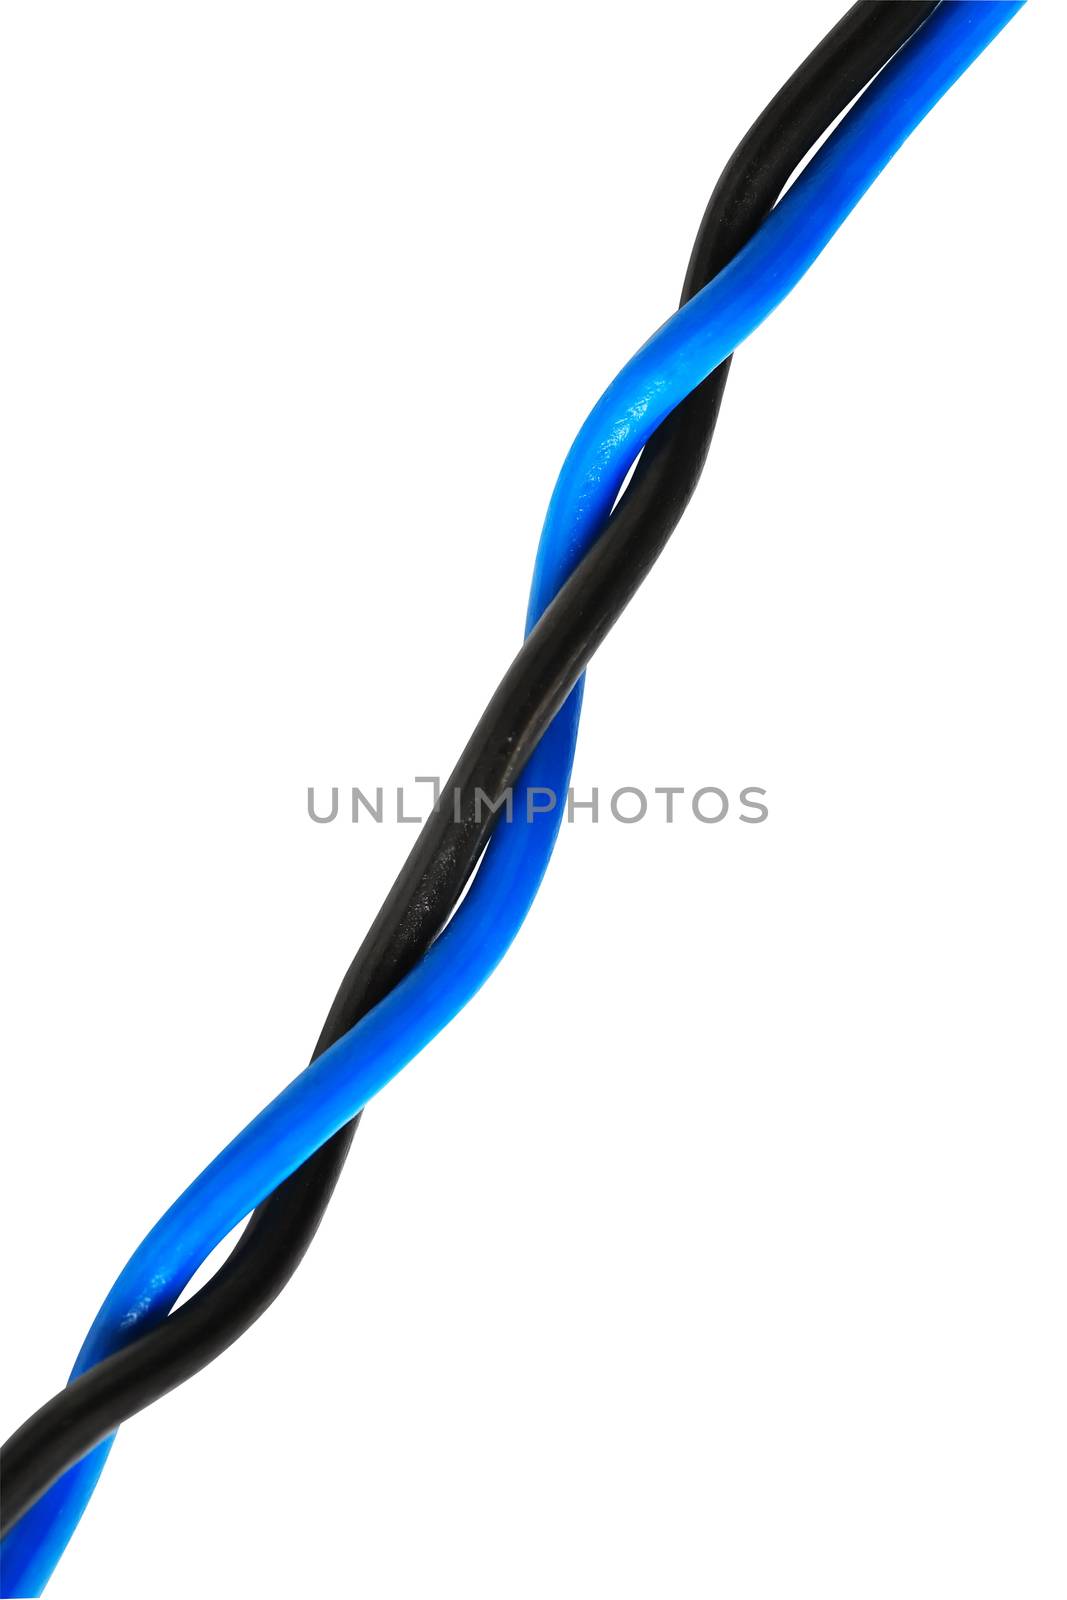 Blue and black electric cable isolated on white background